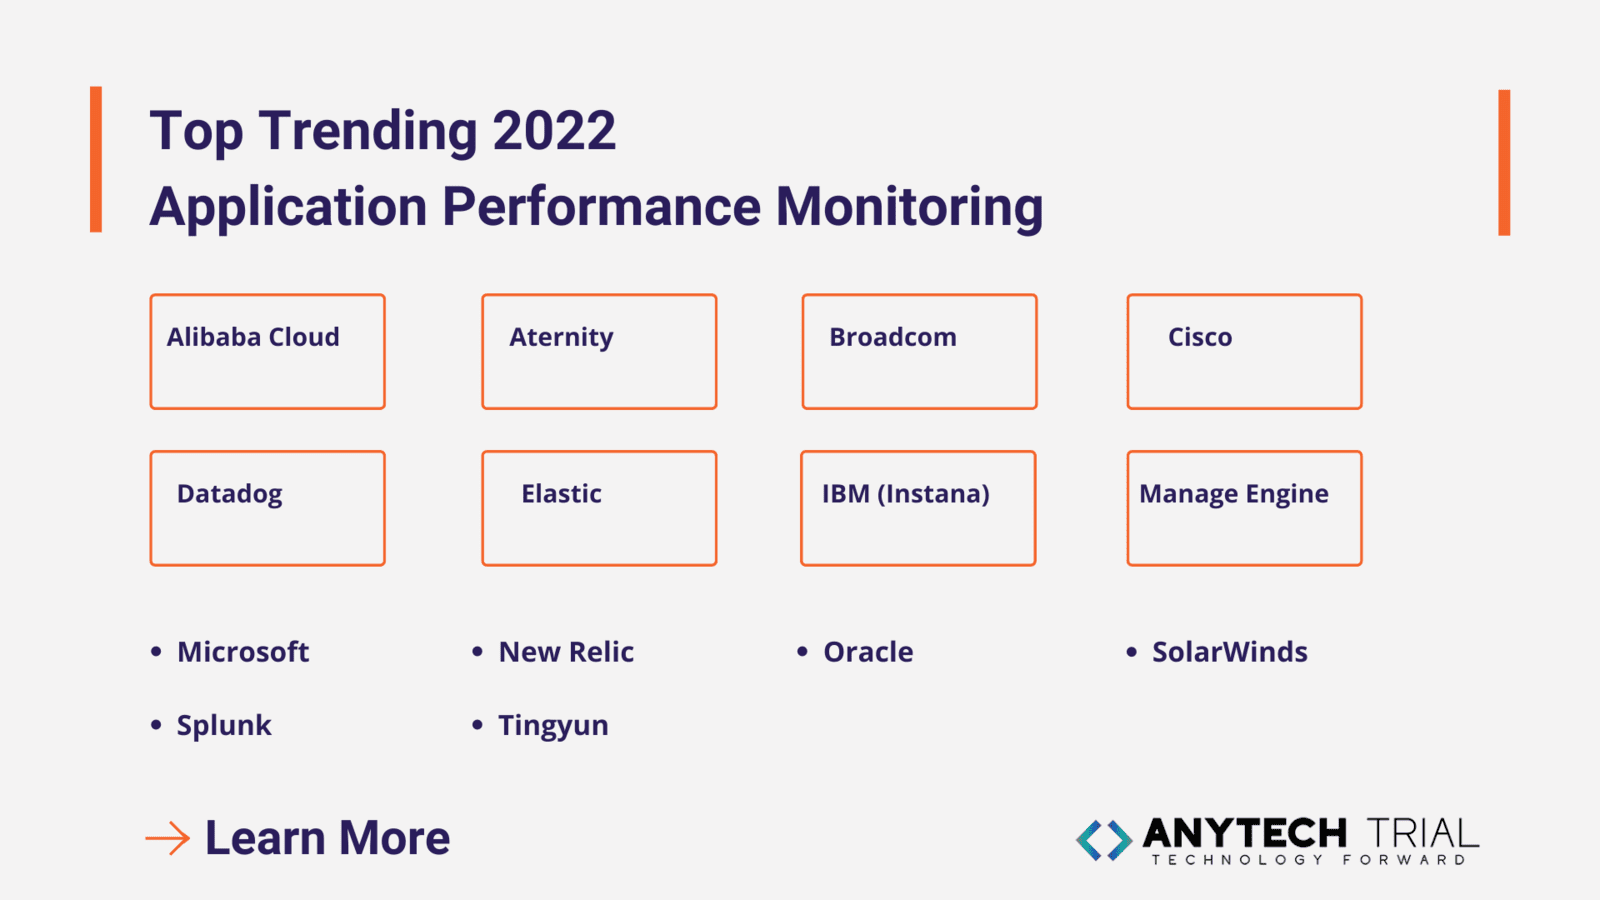 Application Performance Monitoring Solutions (APM)